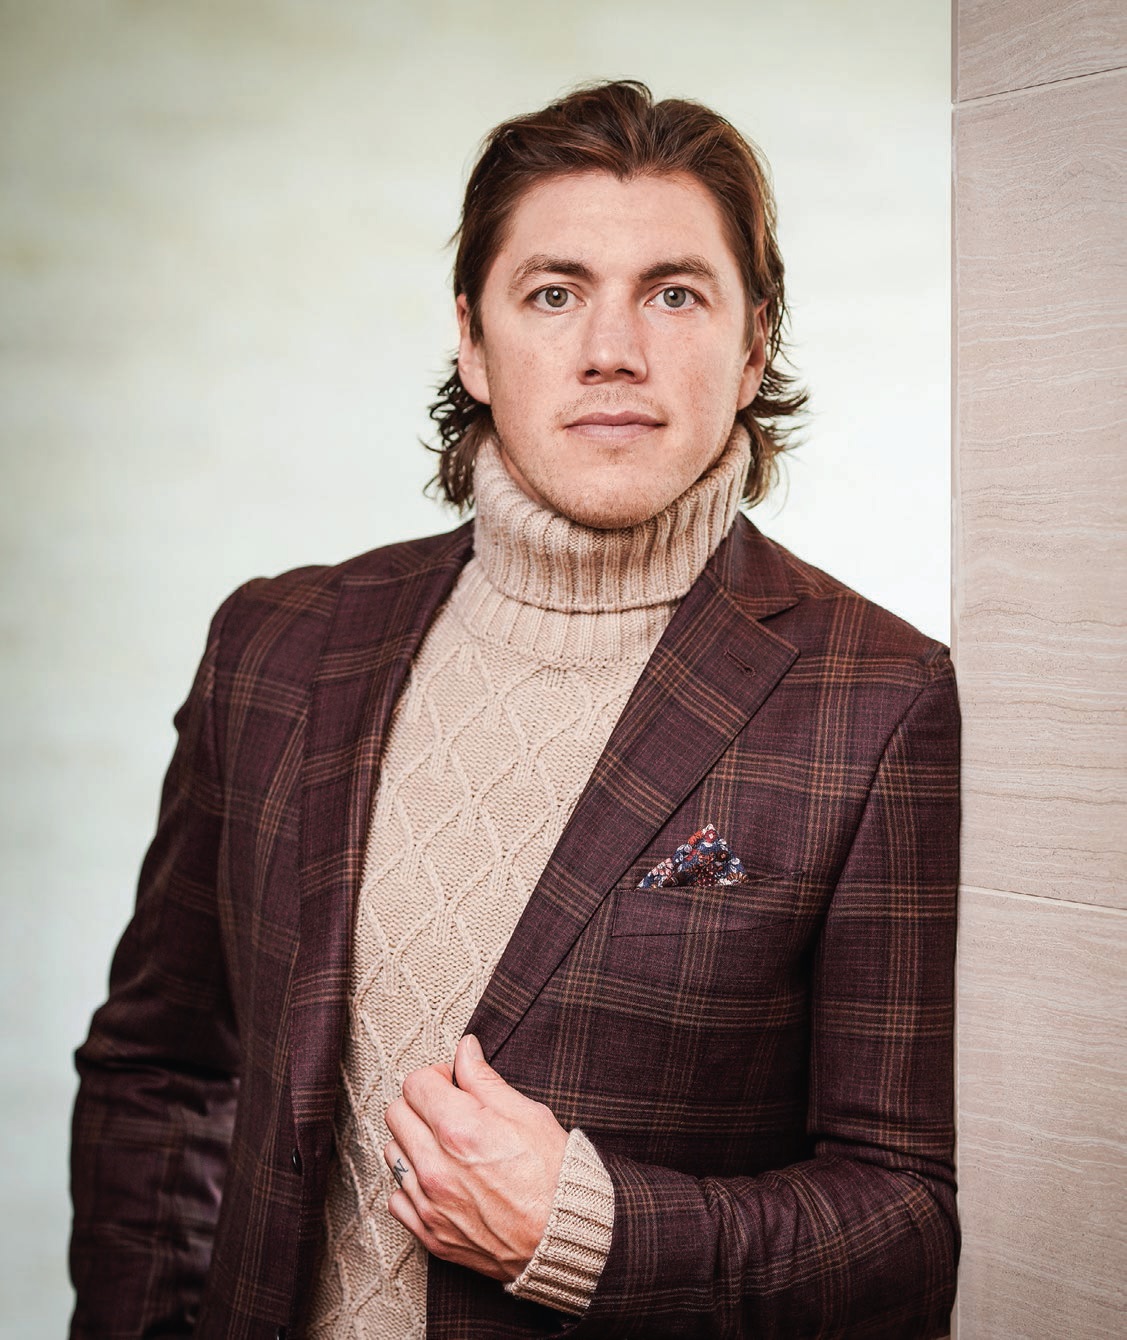 Jacket, turtleneck and pocket square, Saks Fifth Avenue, Tysons PHOTO: BY TONY POWELL, STYLING BY LINDSEY EVANS STUDIO